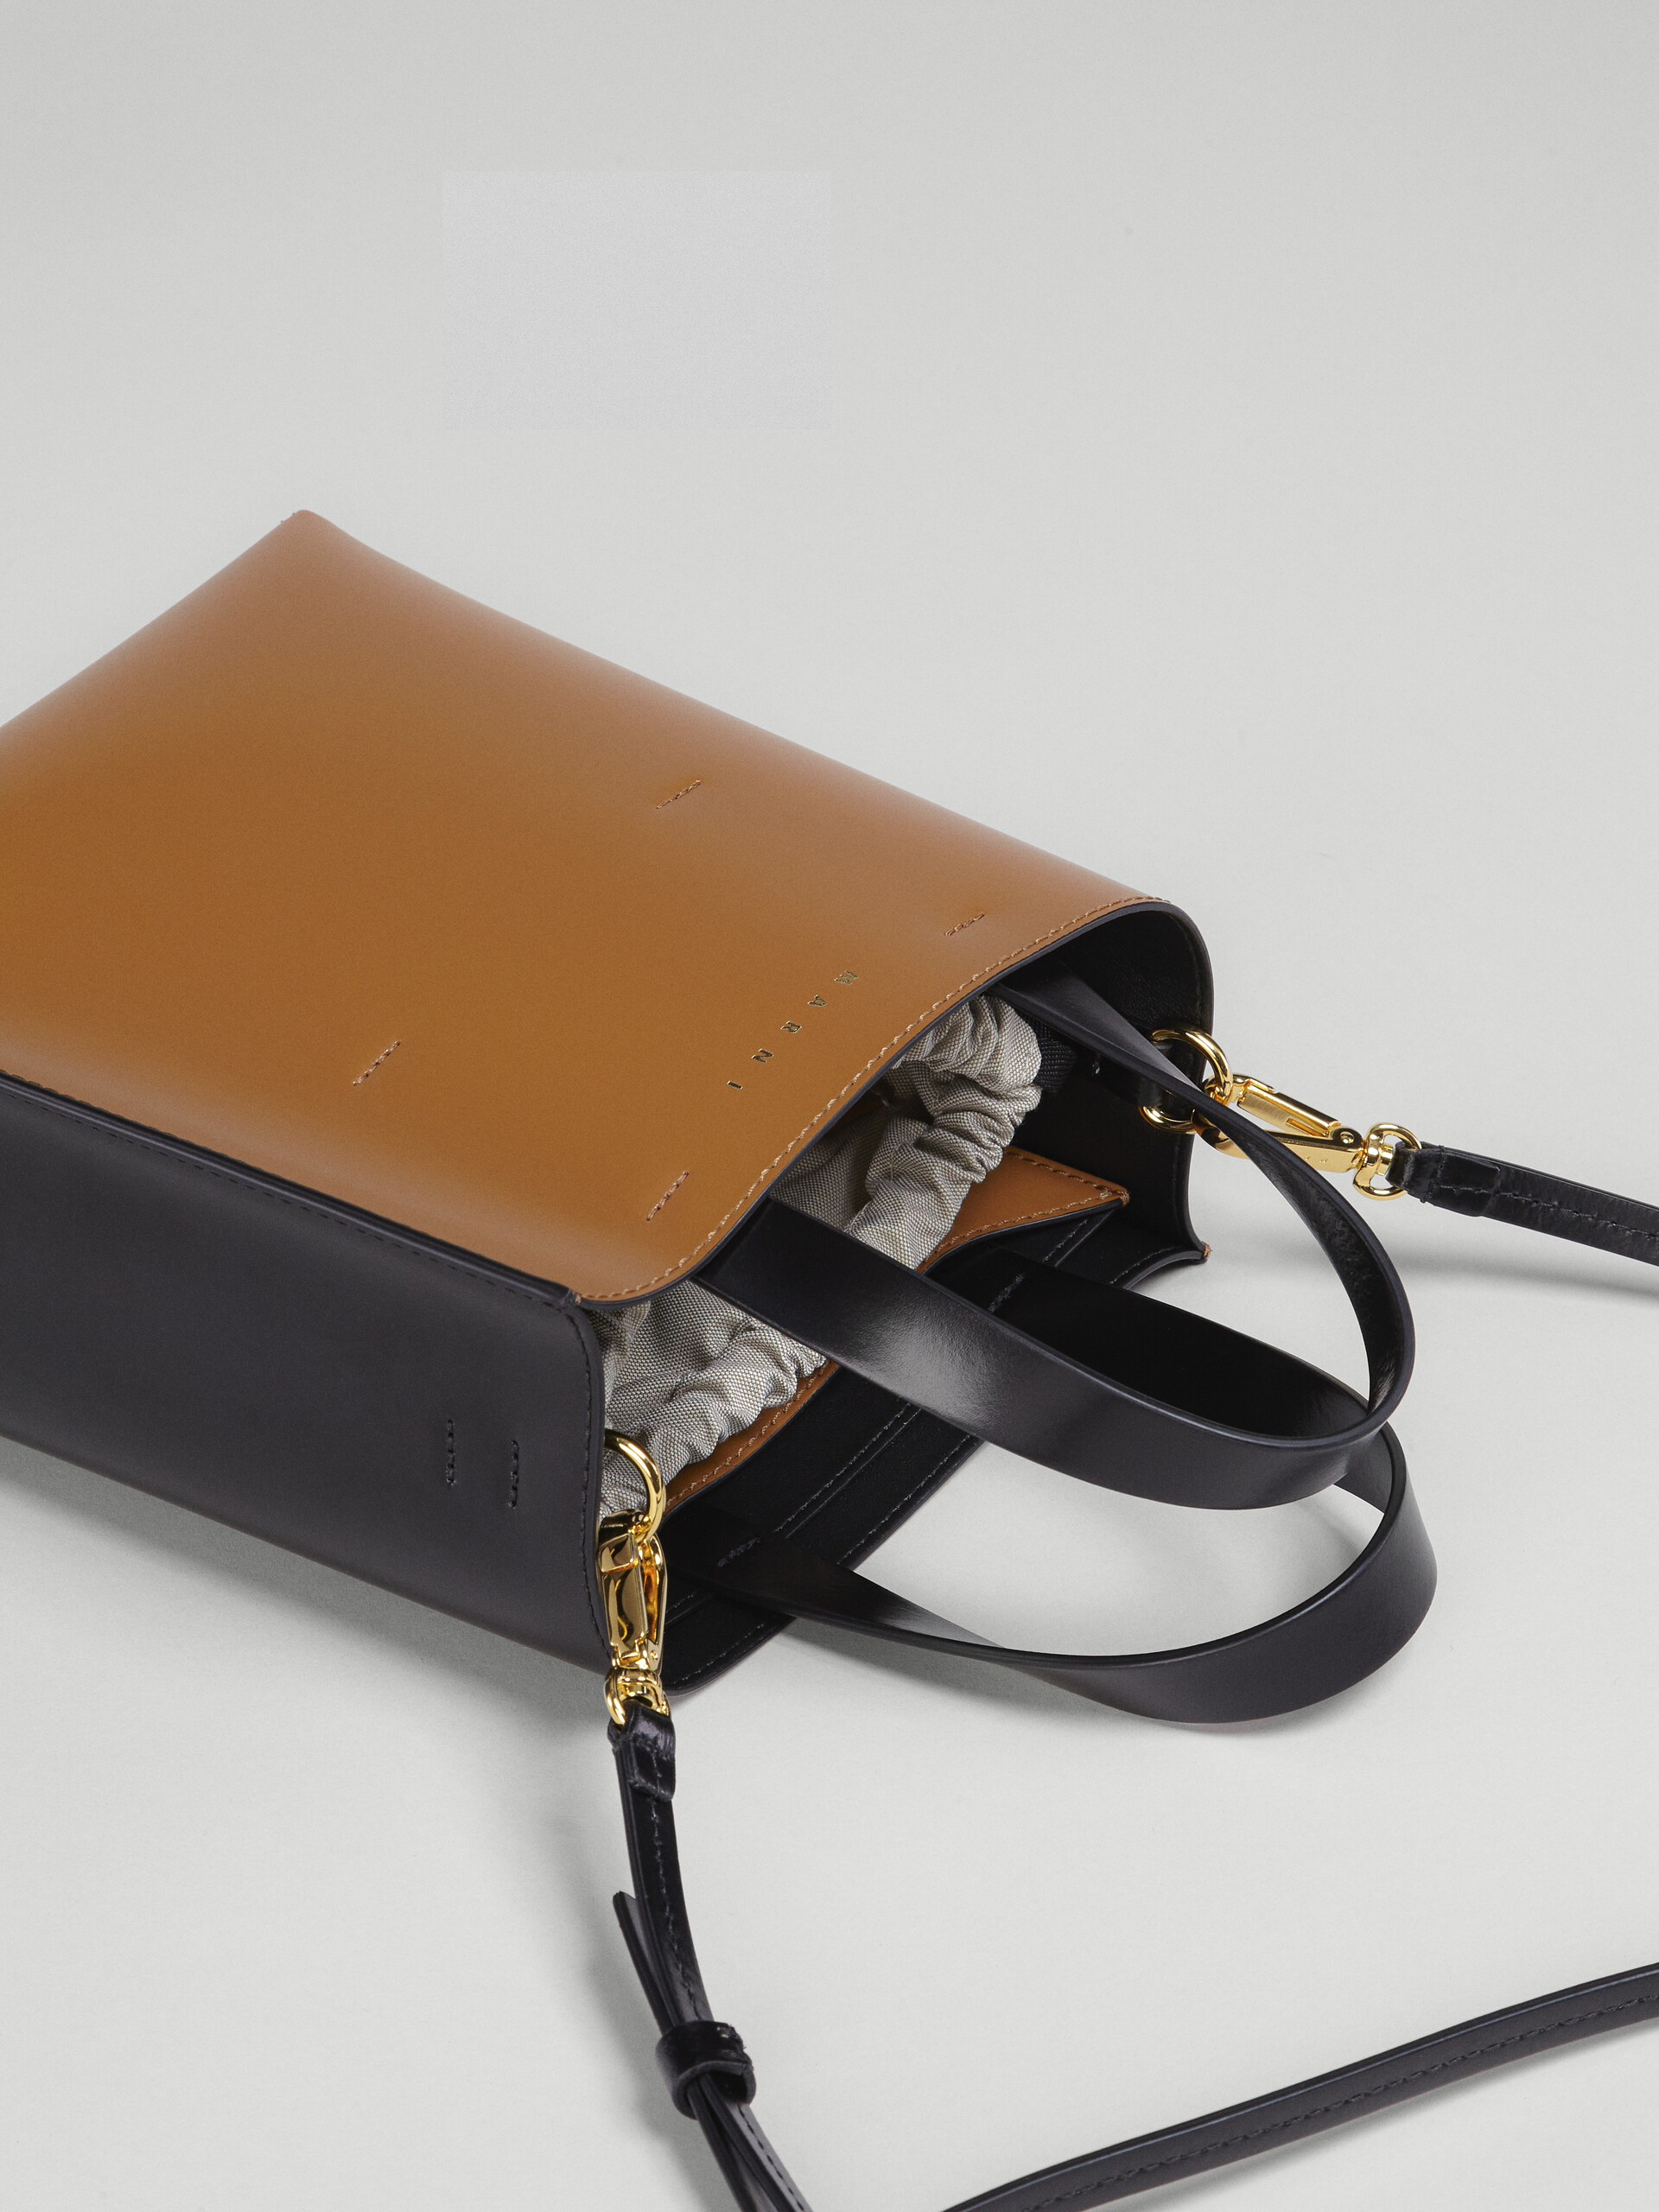 MUSEO mini bag in brown and black leather - Shopping Bags - Image 4